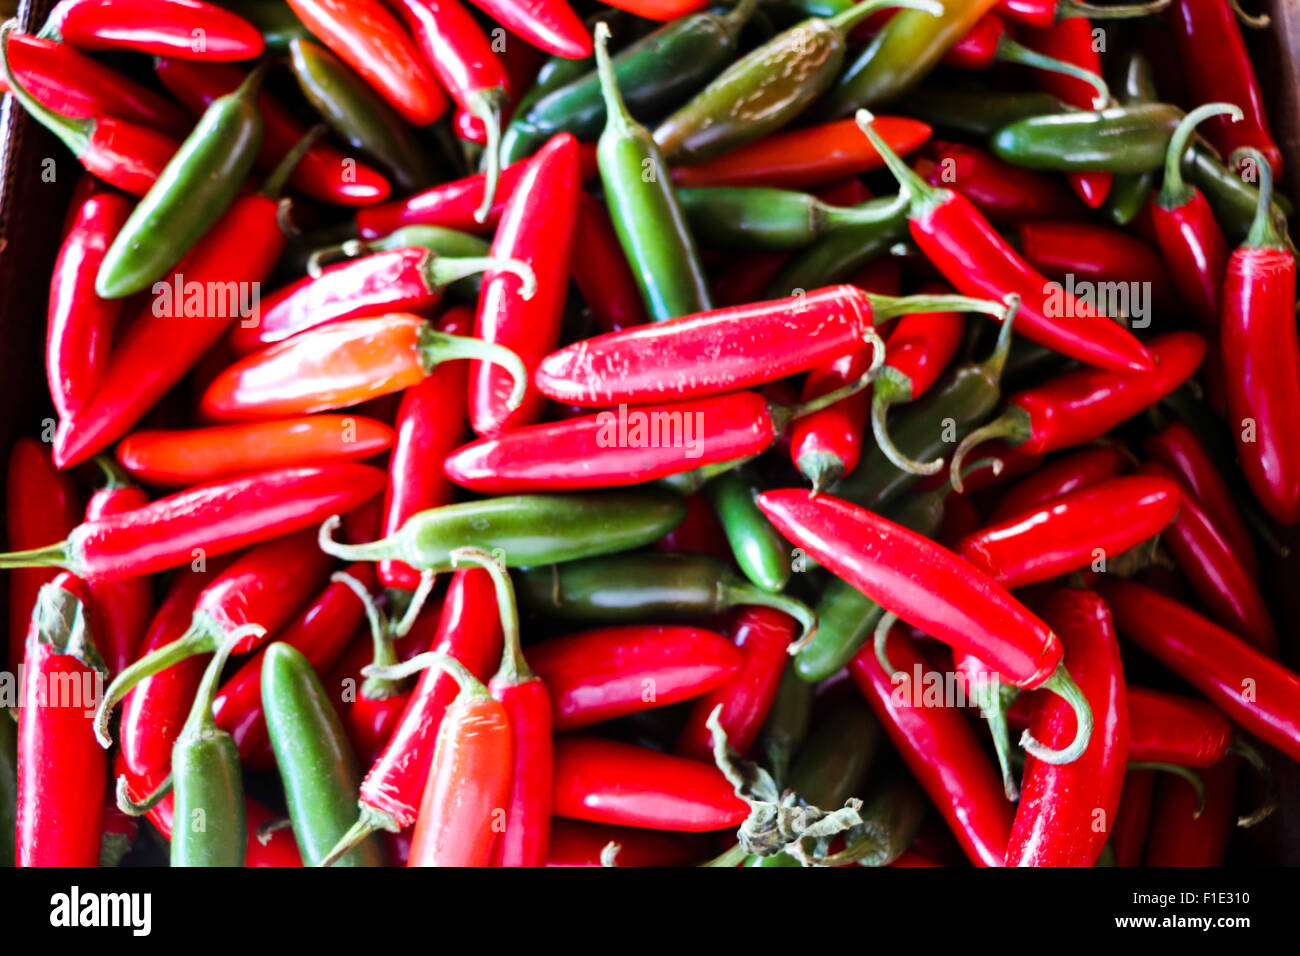 Red & green hot fresh peppers Stock Photo